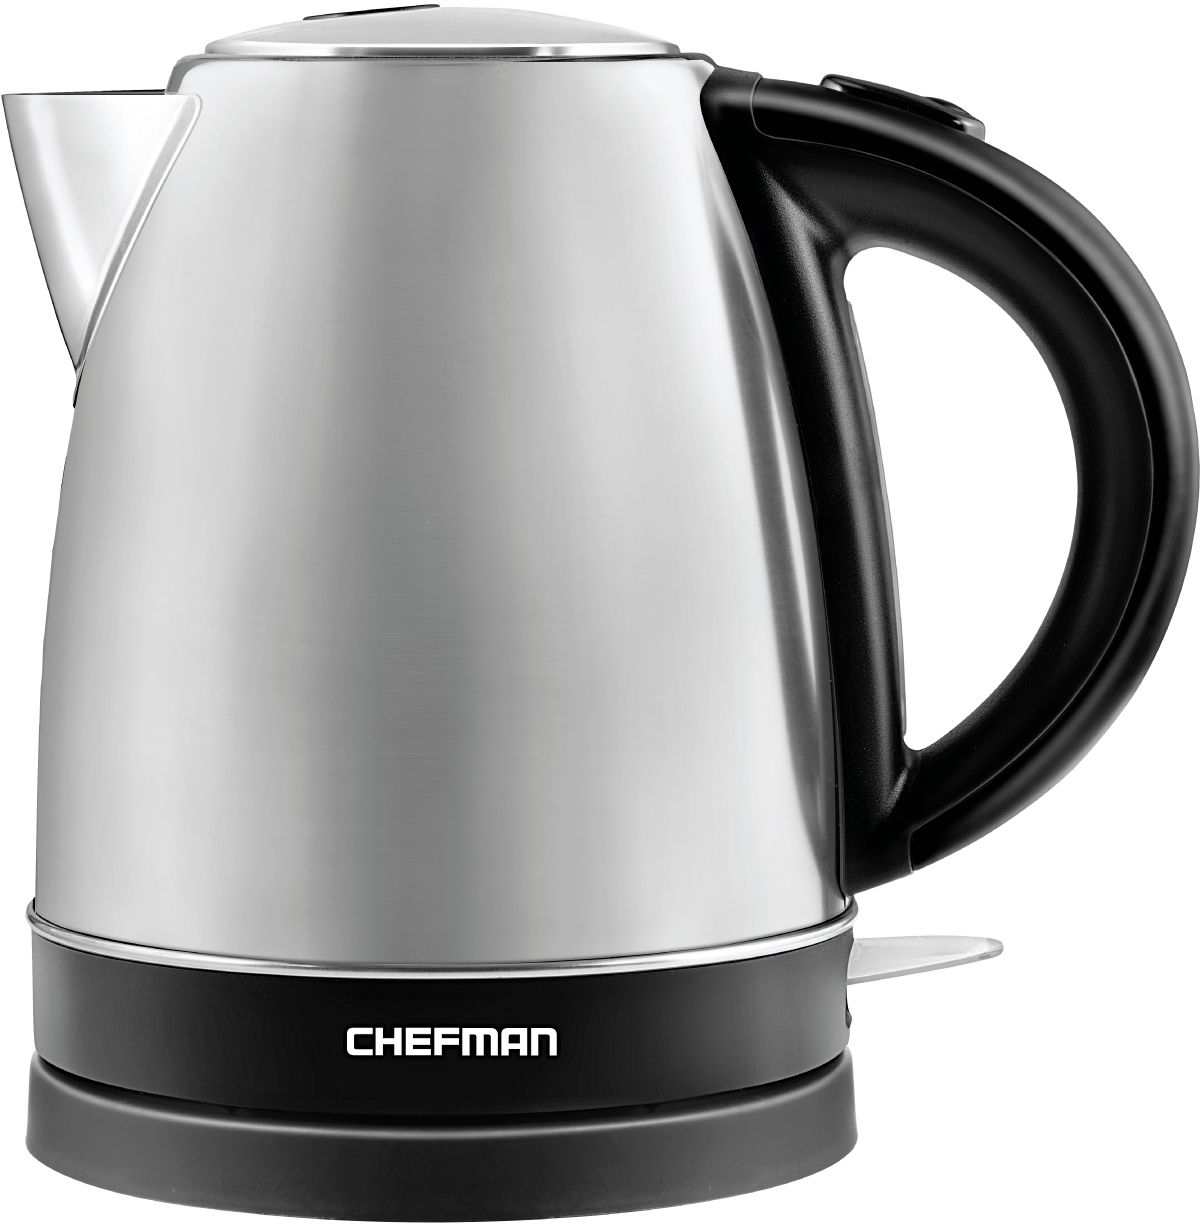 CHEFMAN - 1.7L Electric Kettle - Stainless Steel